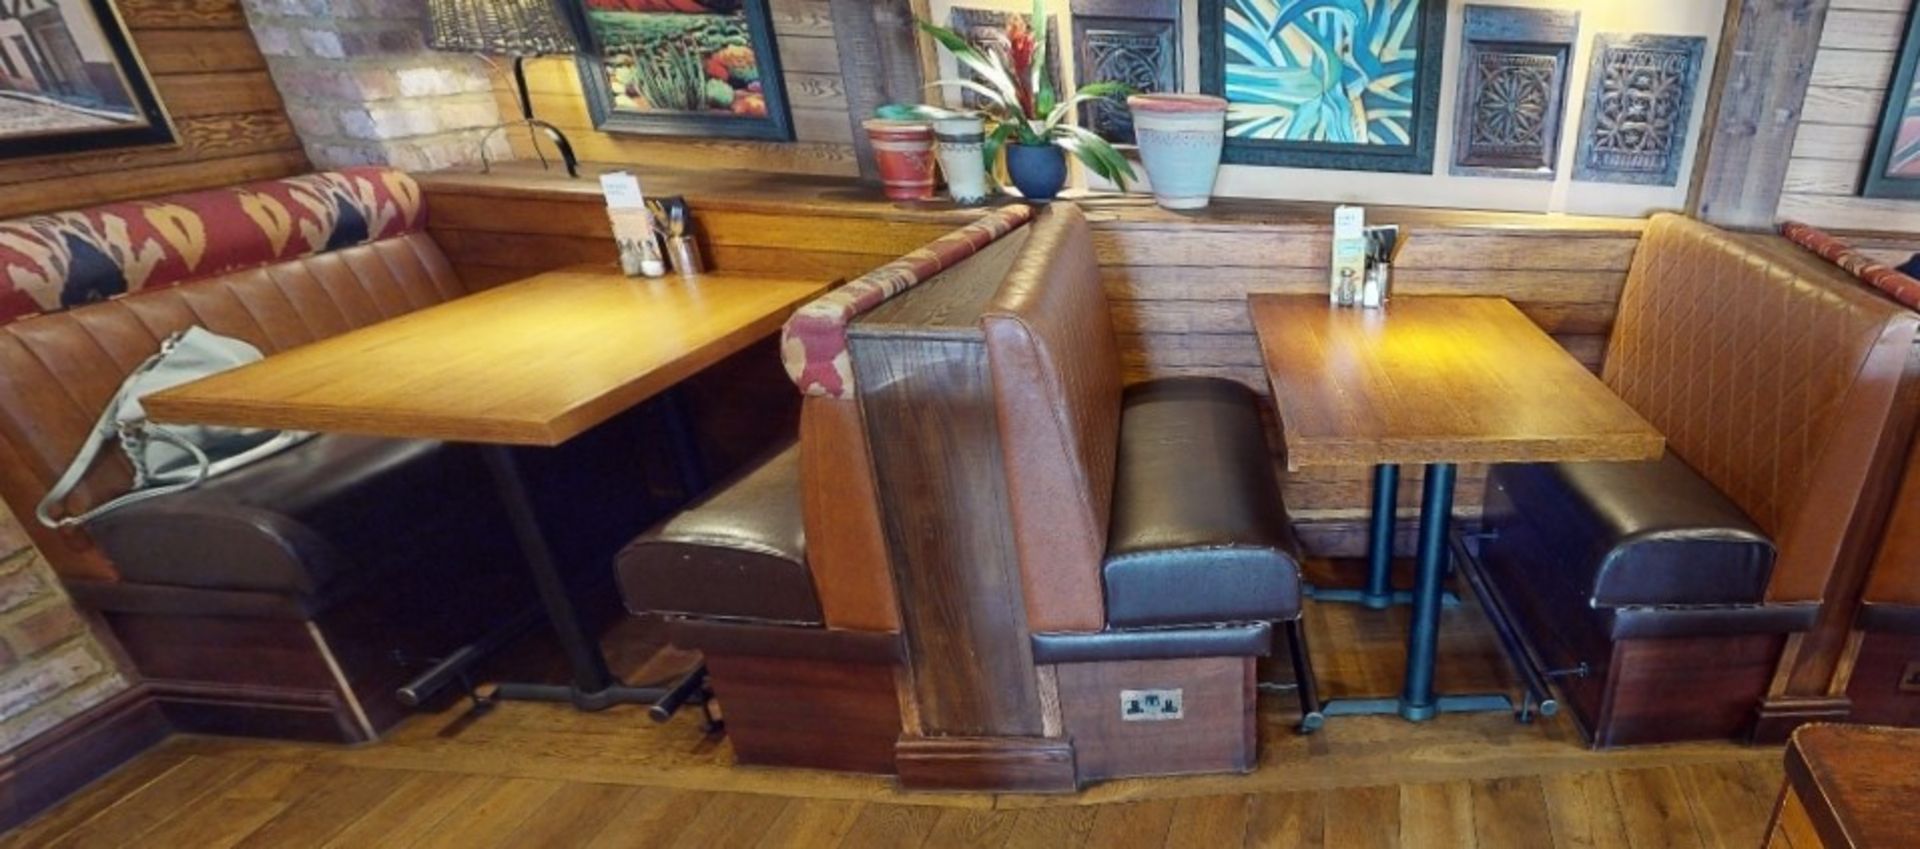 1 x Collection of Restaurant High Double Seat Seating Benches With Footrests - Includes 2 x End - Image 5 of 5